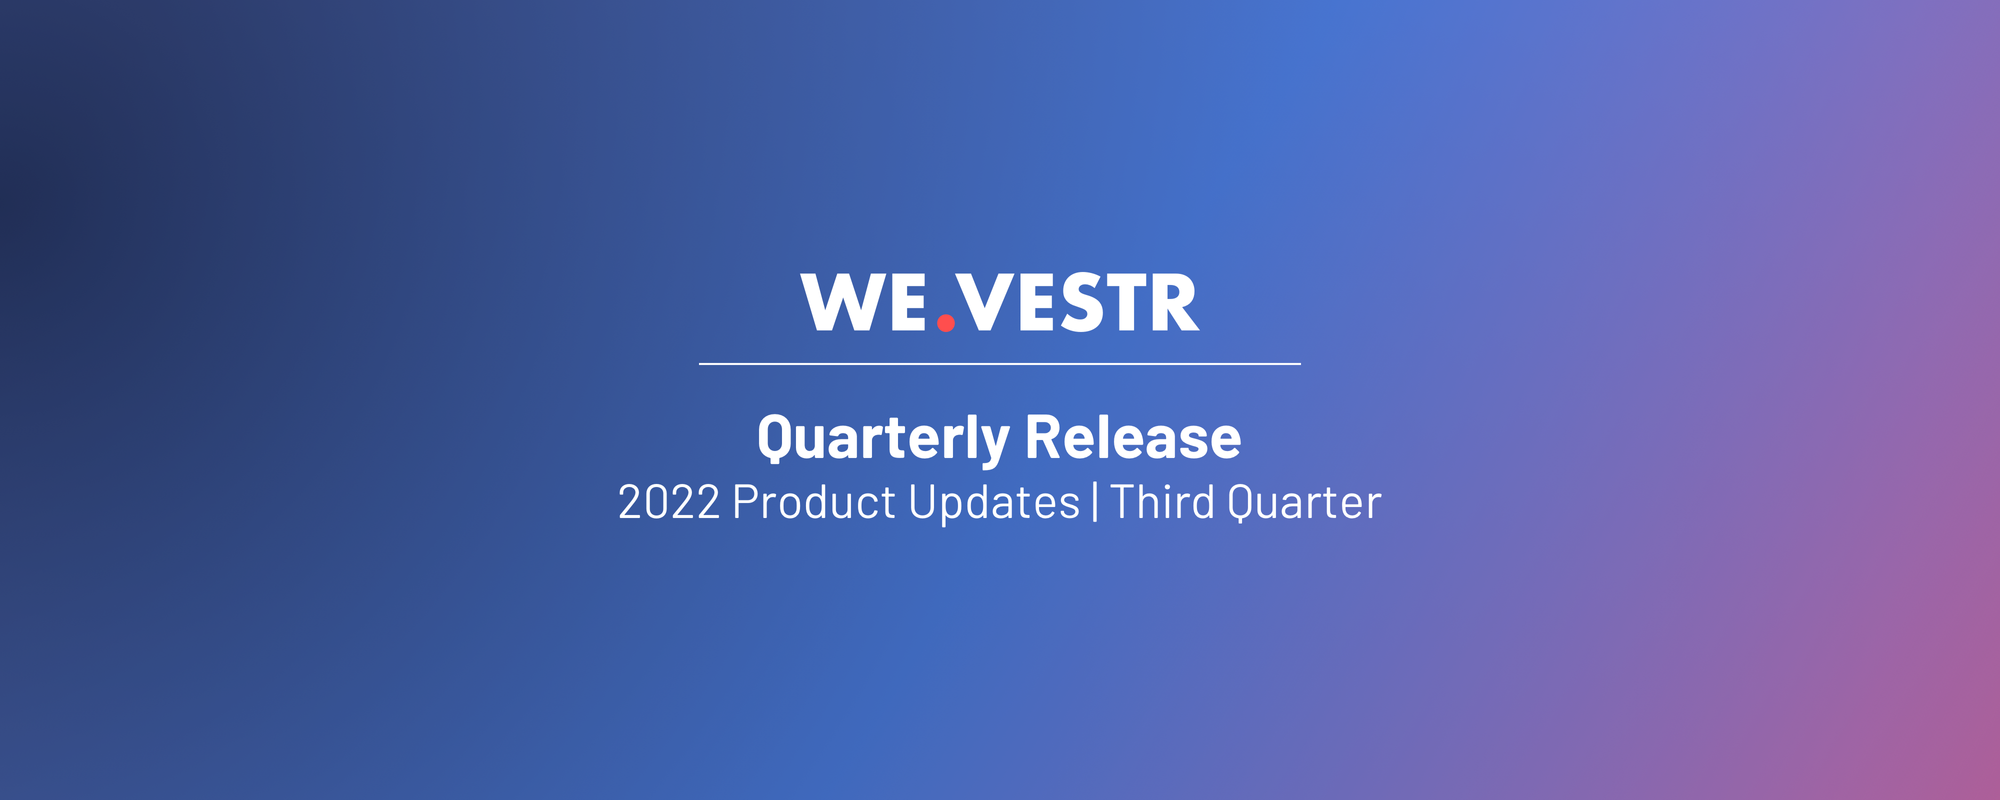 The Latest WE.VESTR Product Upgrades